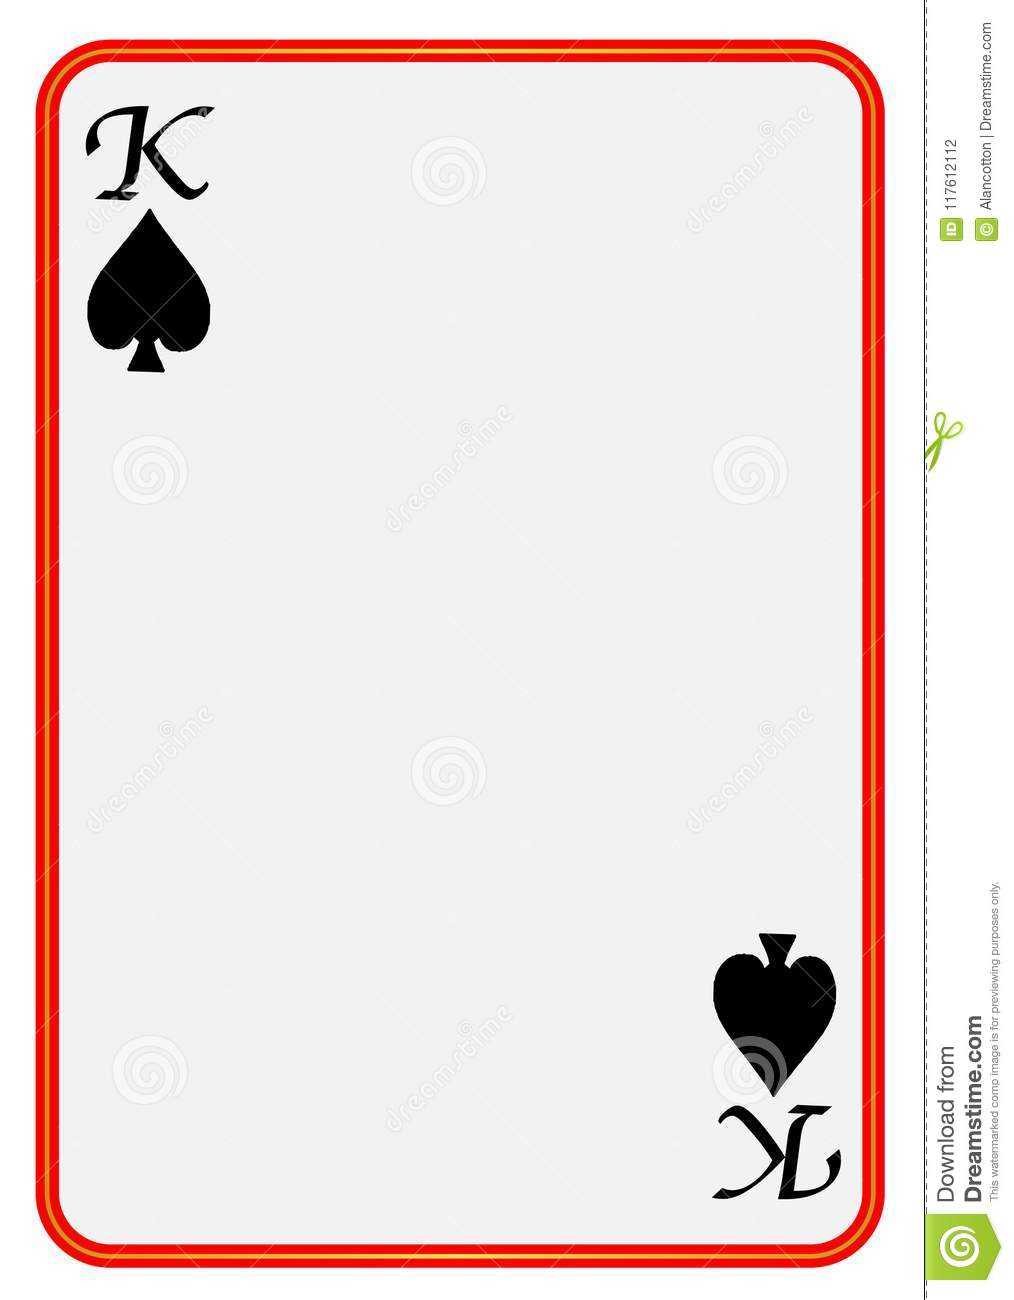 Blank Playing Card King Spades Stock Vector – Illustration With Blank Playing Card Template